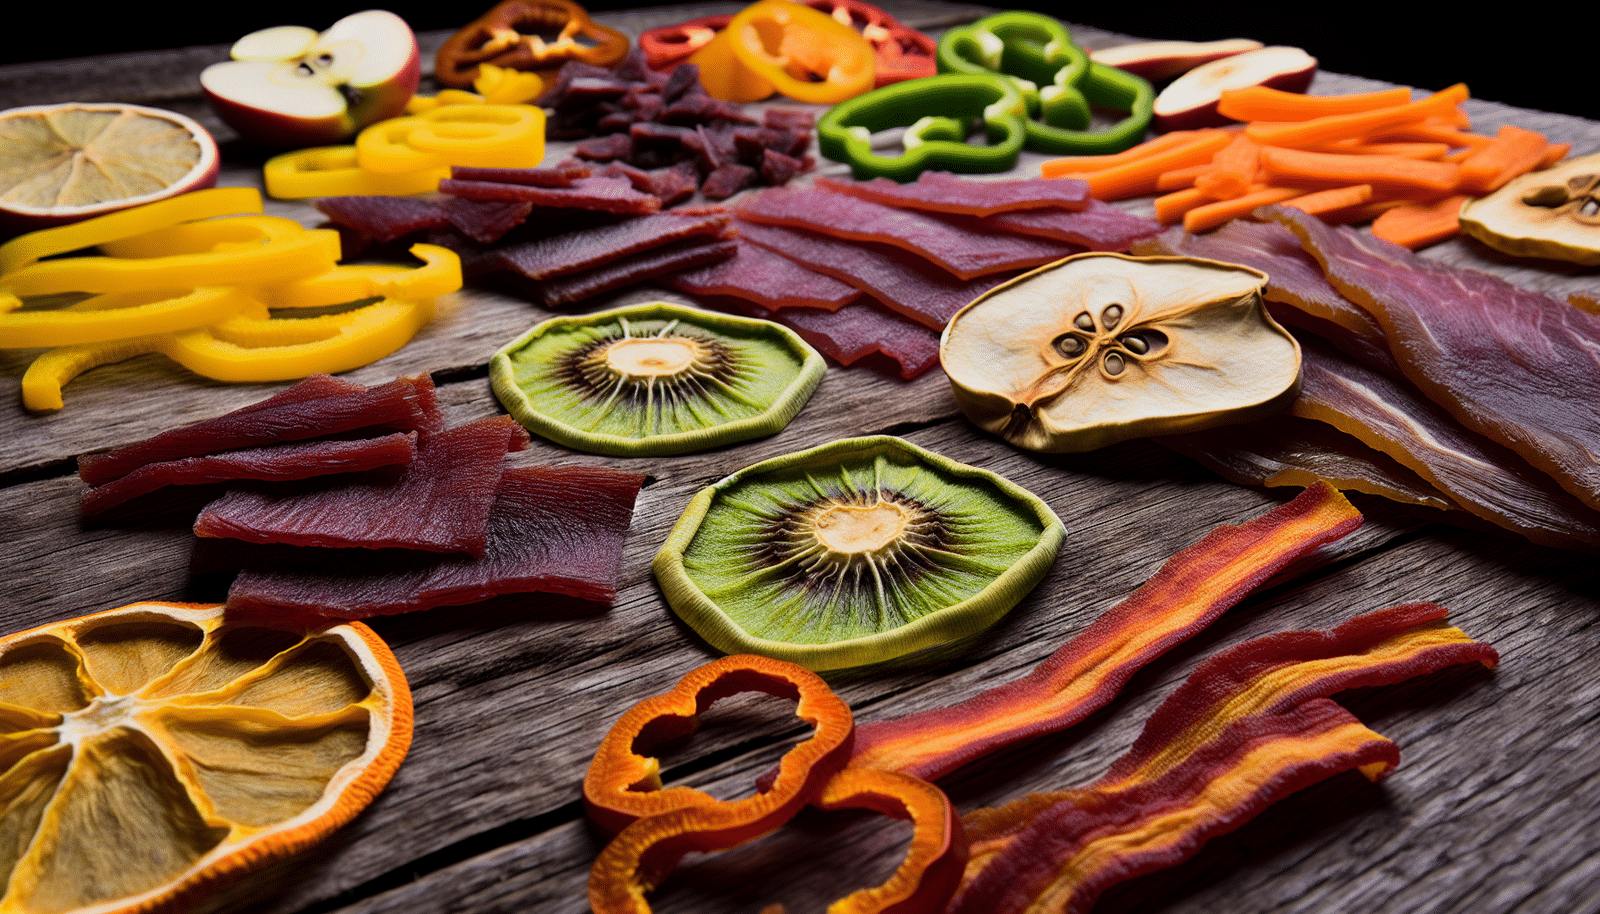 Types of Dehydrated Foods Suitable for Vacuum Sealing